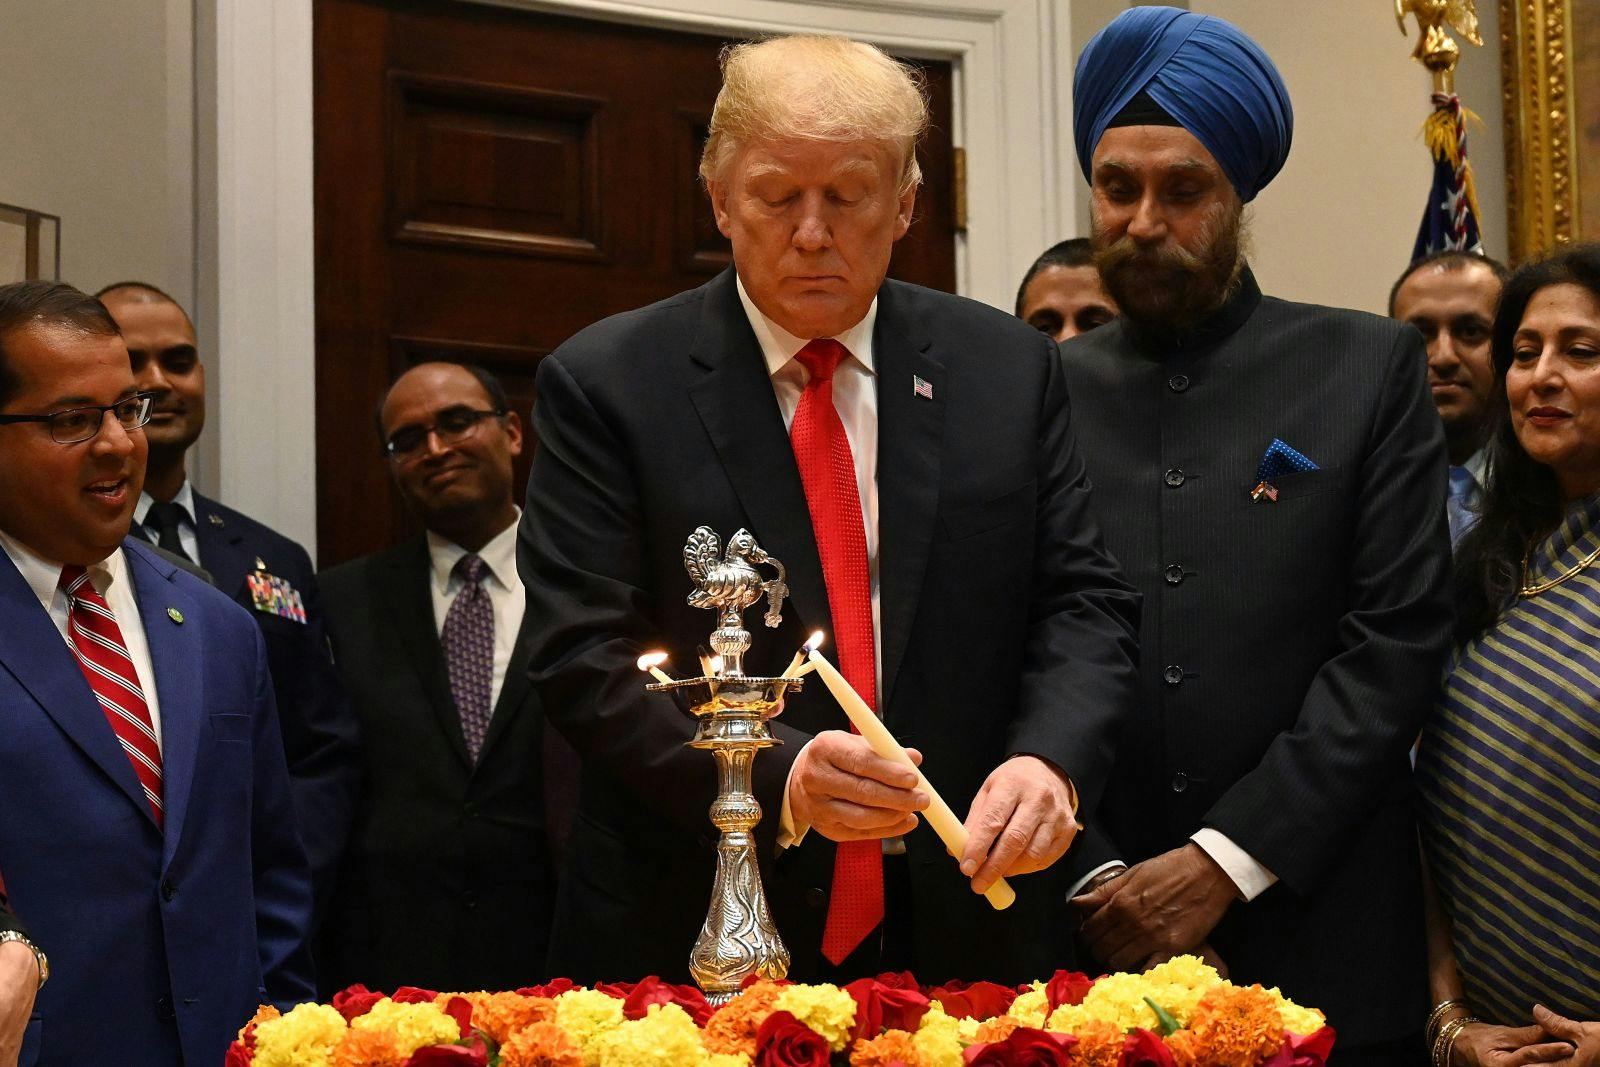 US President Donald Trump lights the Diya during the Diwali ceremonial at the White House in Washington, DC, on November 13, 2018. (JIM WATSON/AFP via Getty Images)